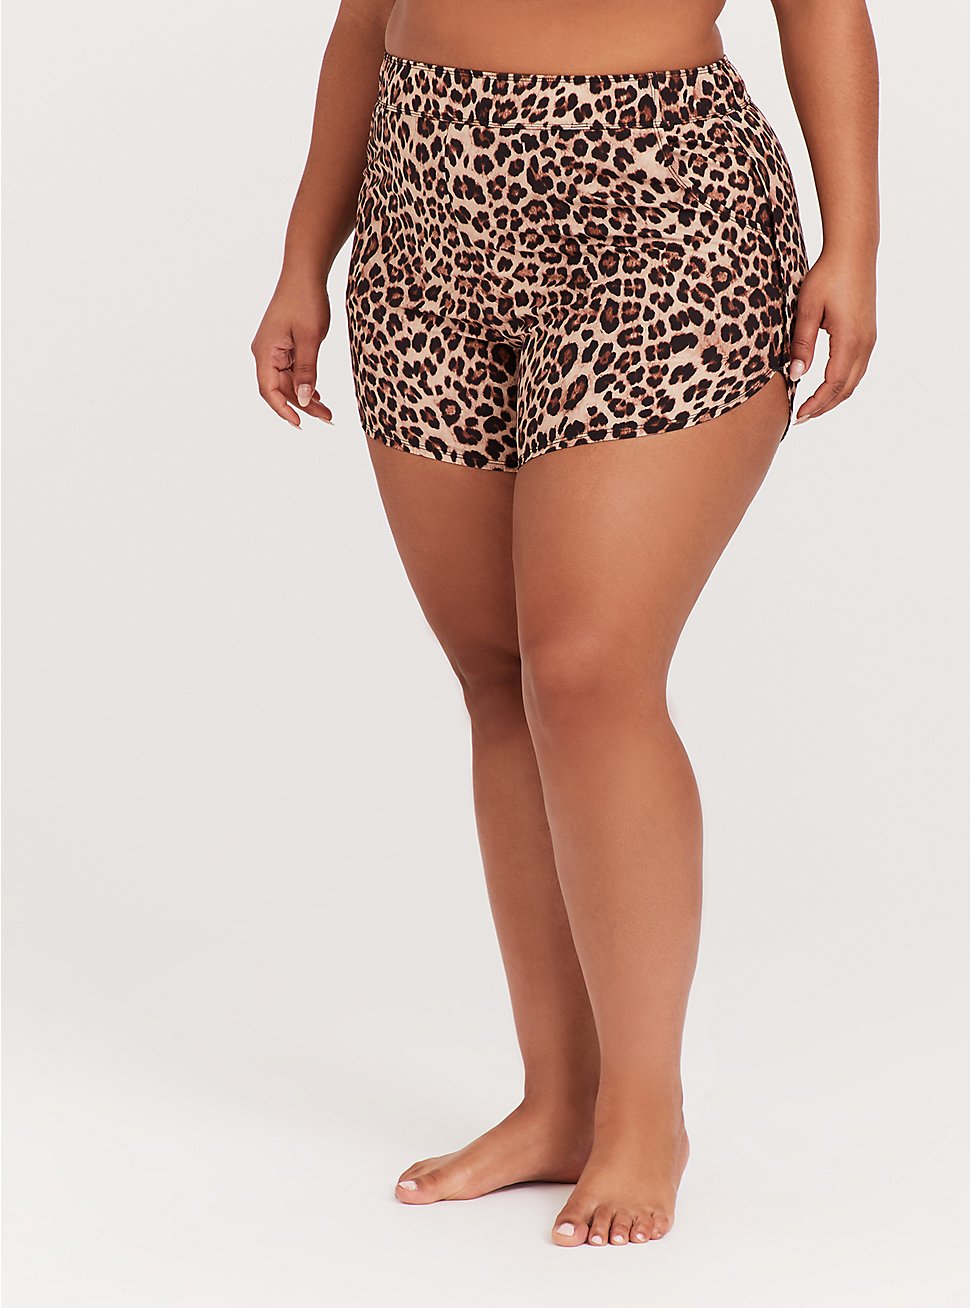 IORTY RTTY Brown Leopard Print Travel Vacation Board Shorts for Men Plus Size Swimming Trunks